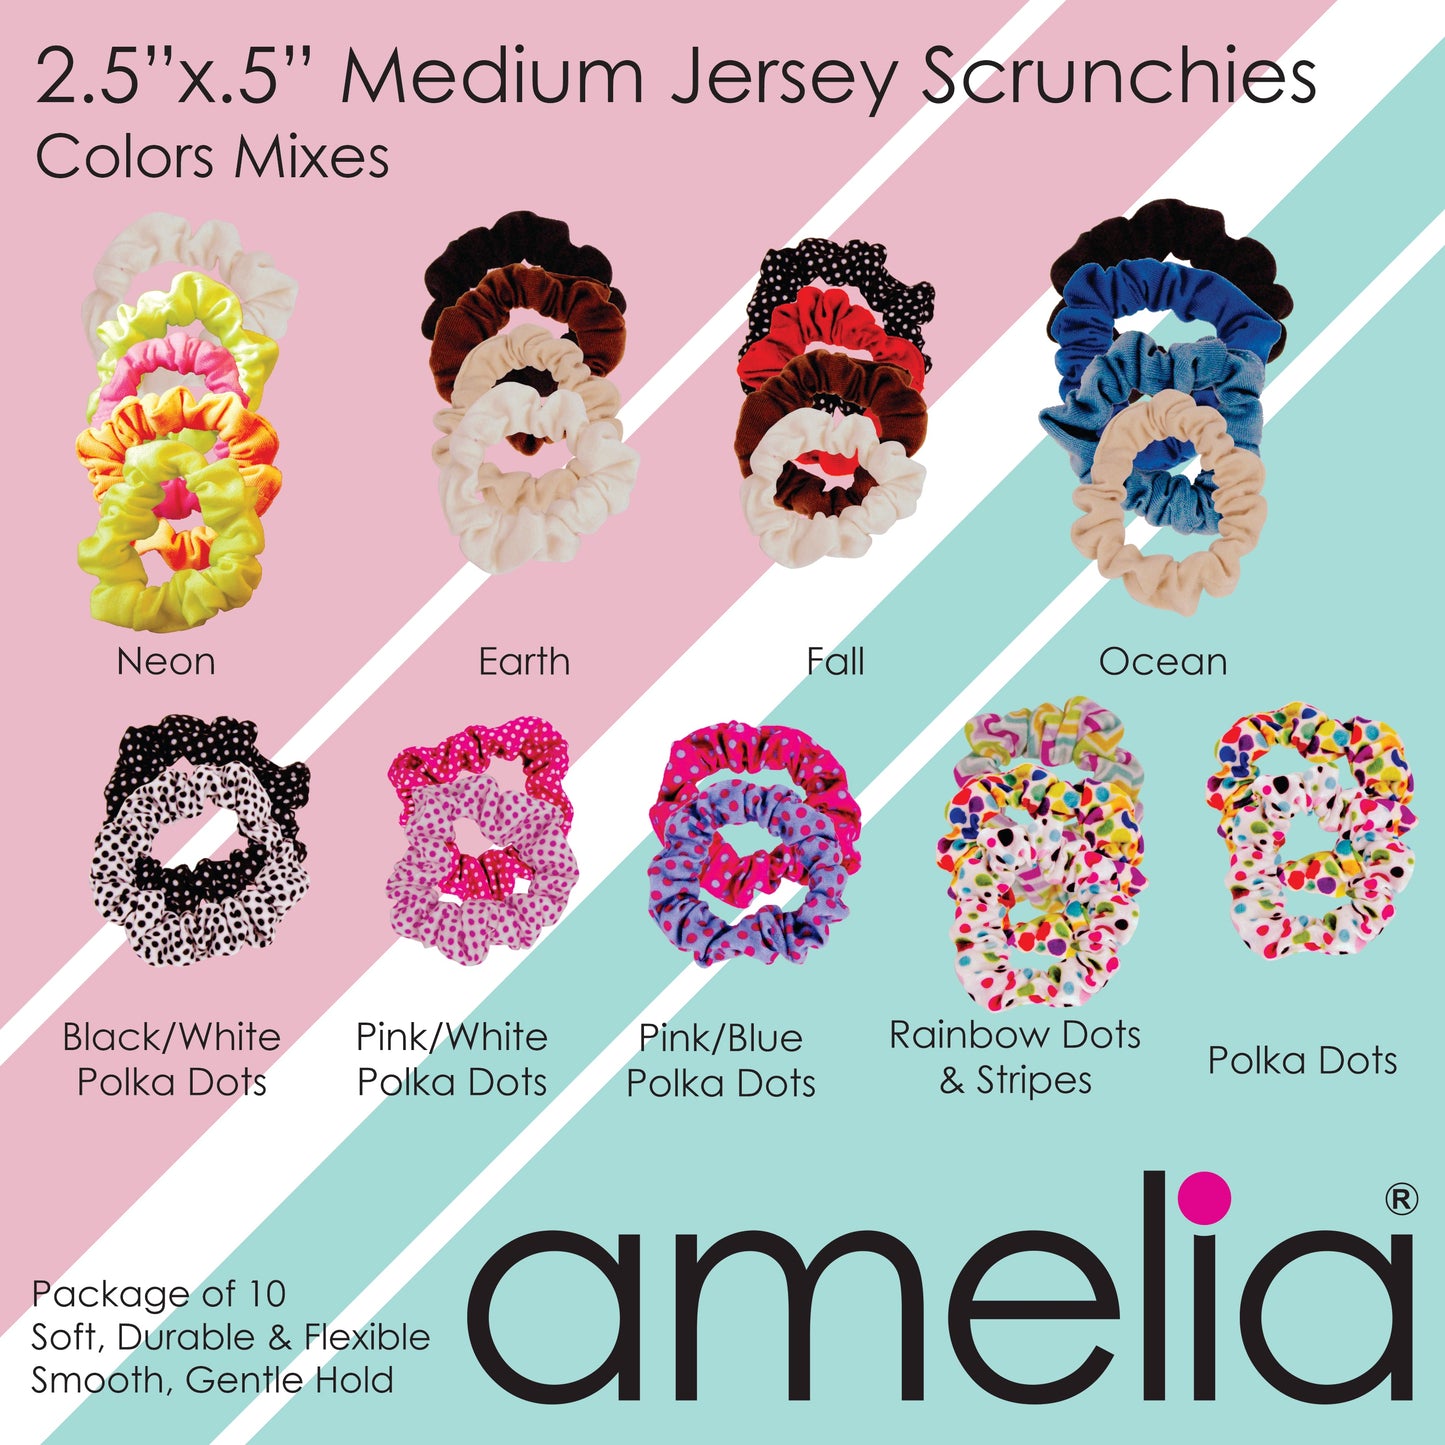 Amelia Beauty, Medium Fall Colors Jersey Scrunchies, 2.5in Diameter, Gentle on Hair, Strong Hold, No Snag, No Dents or Creases. 10 Pack